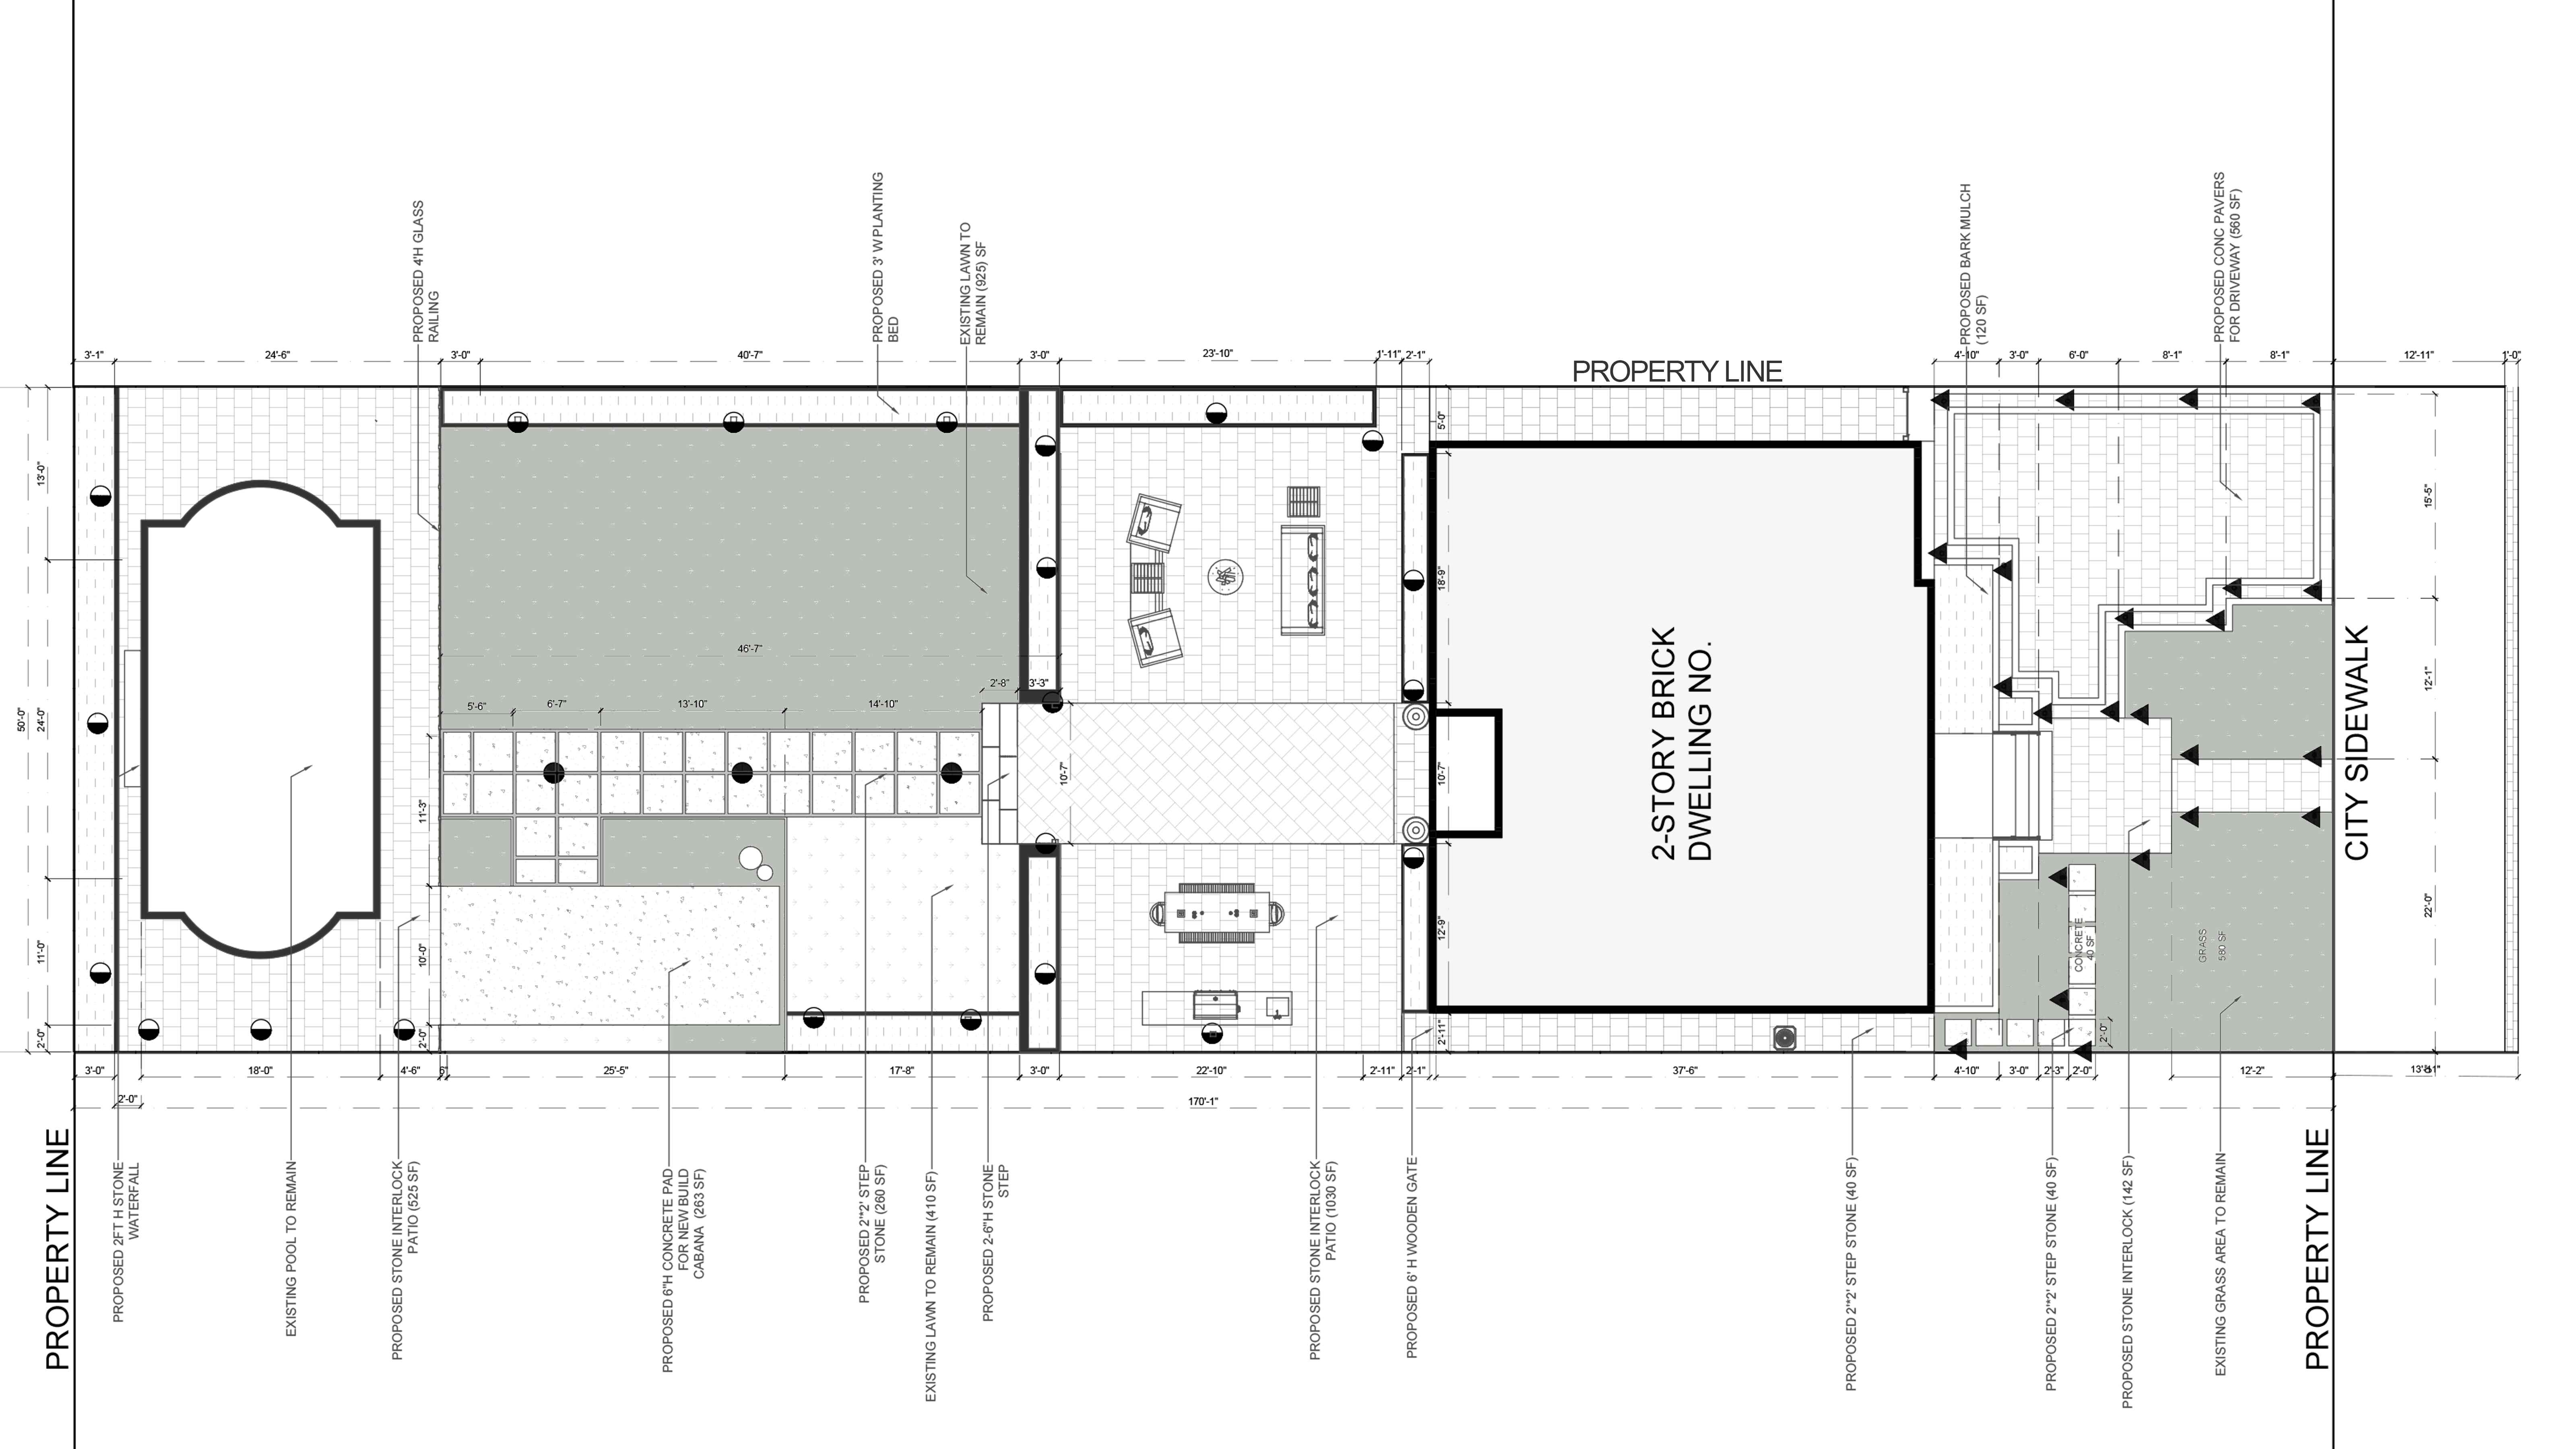 Architectural site plan of a property showing various sections including an open space area, rooms with furniture, a large swimming pool, walkways, and measurements.